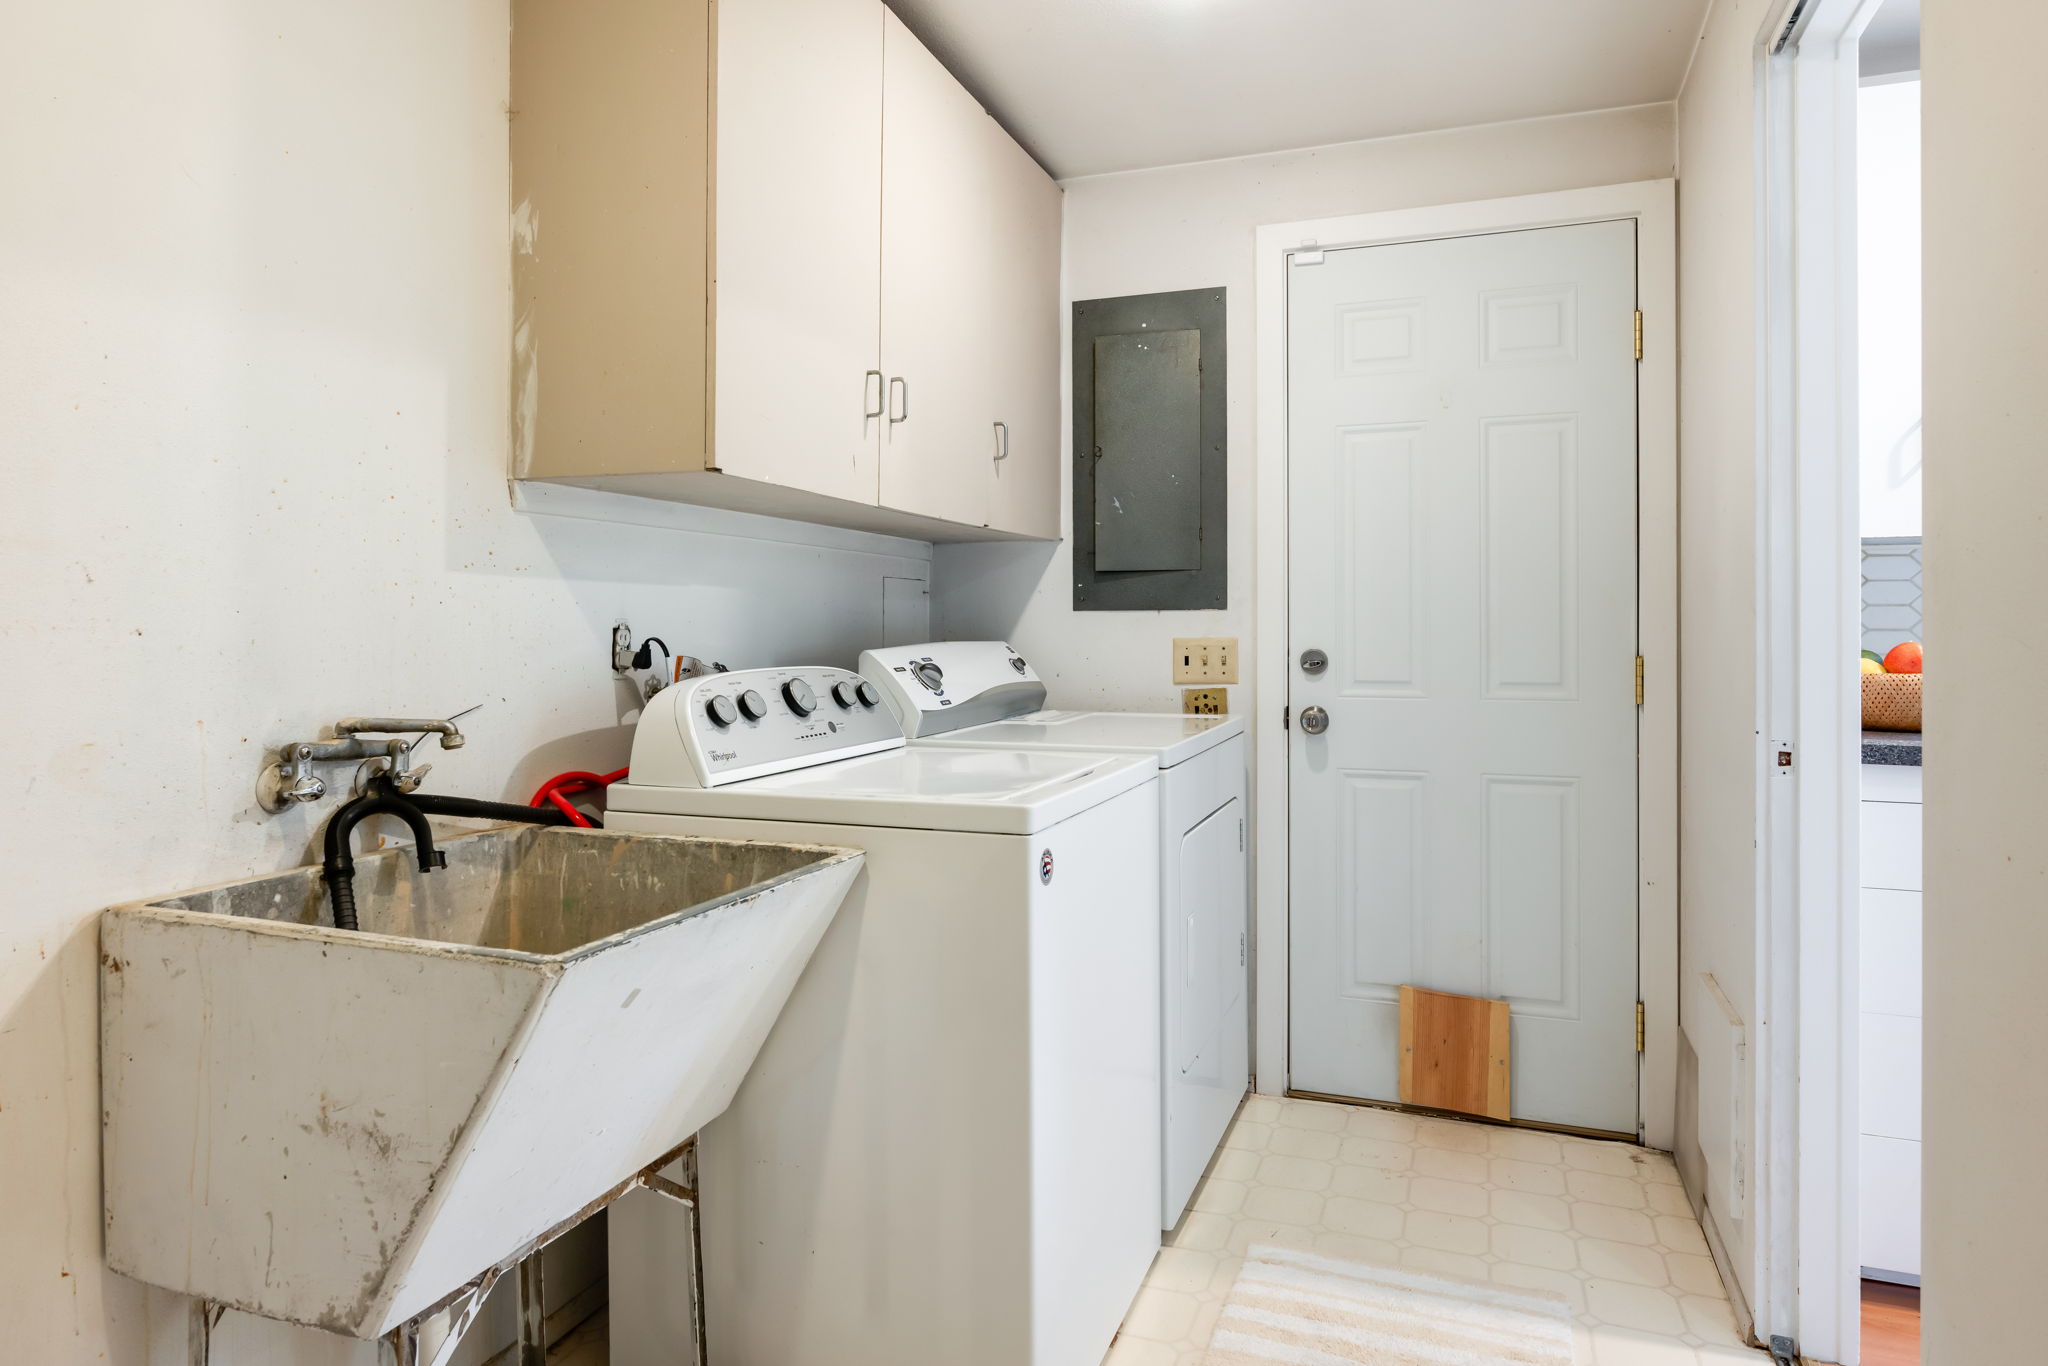 From the kitchen, you'll discover a spacious laundry room complete with a utility sink, cabinetry, and ample pantry space. This room makes household tasks a breeze and offers convenient access from the driveway, making it easy to bring in groceries and more.